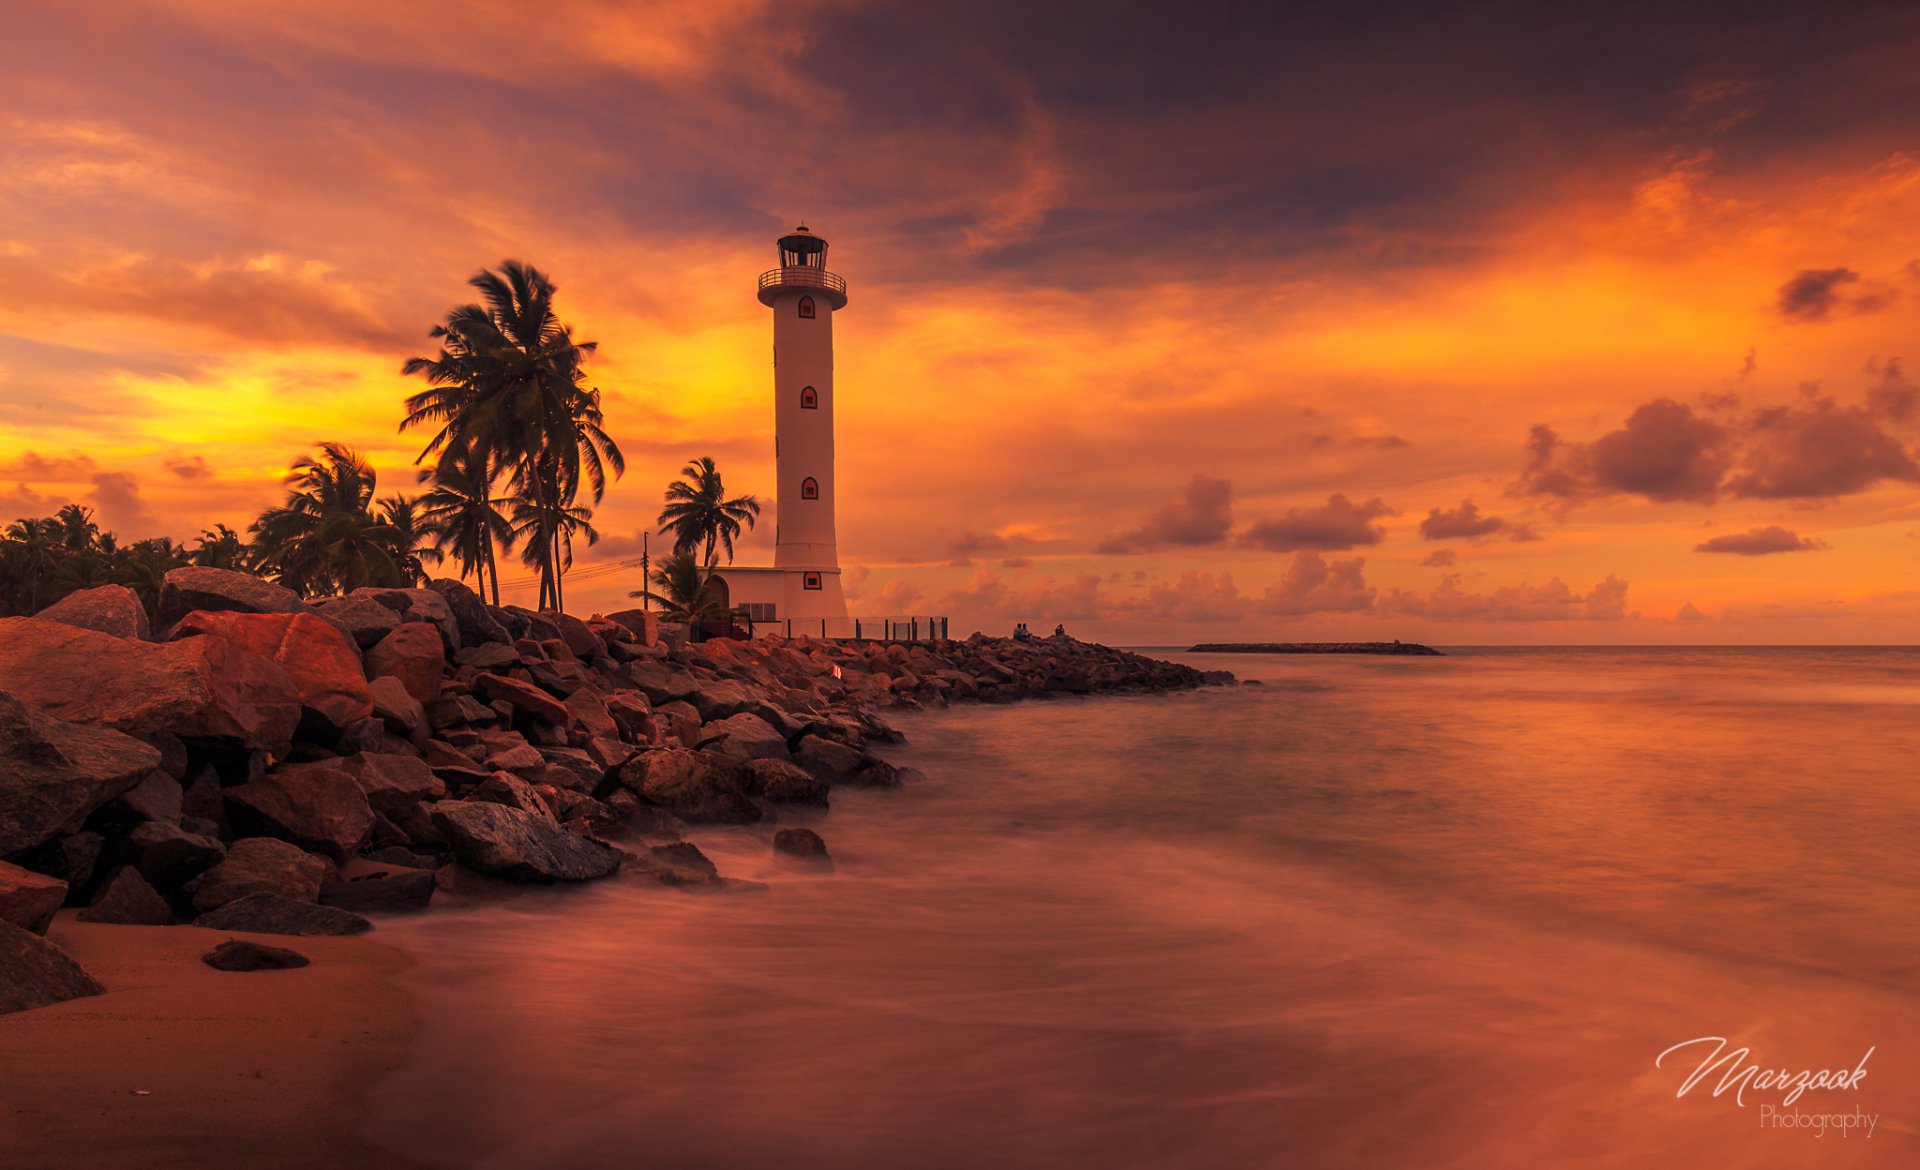 Lighthouse At Sunset By Marzook